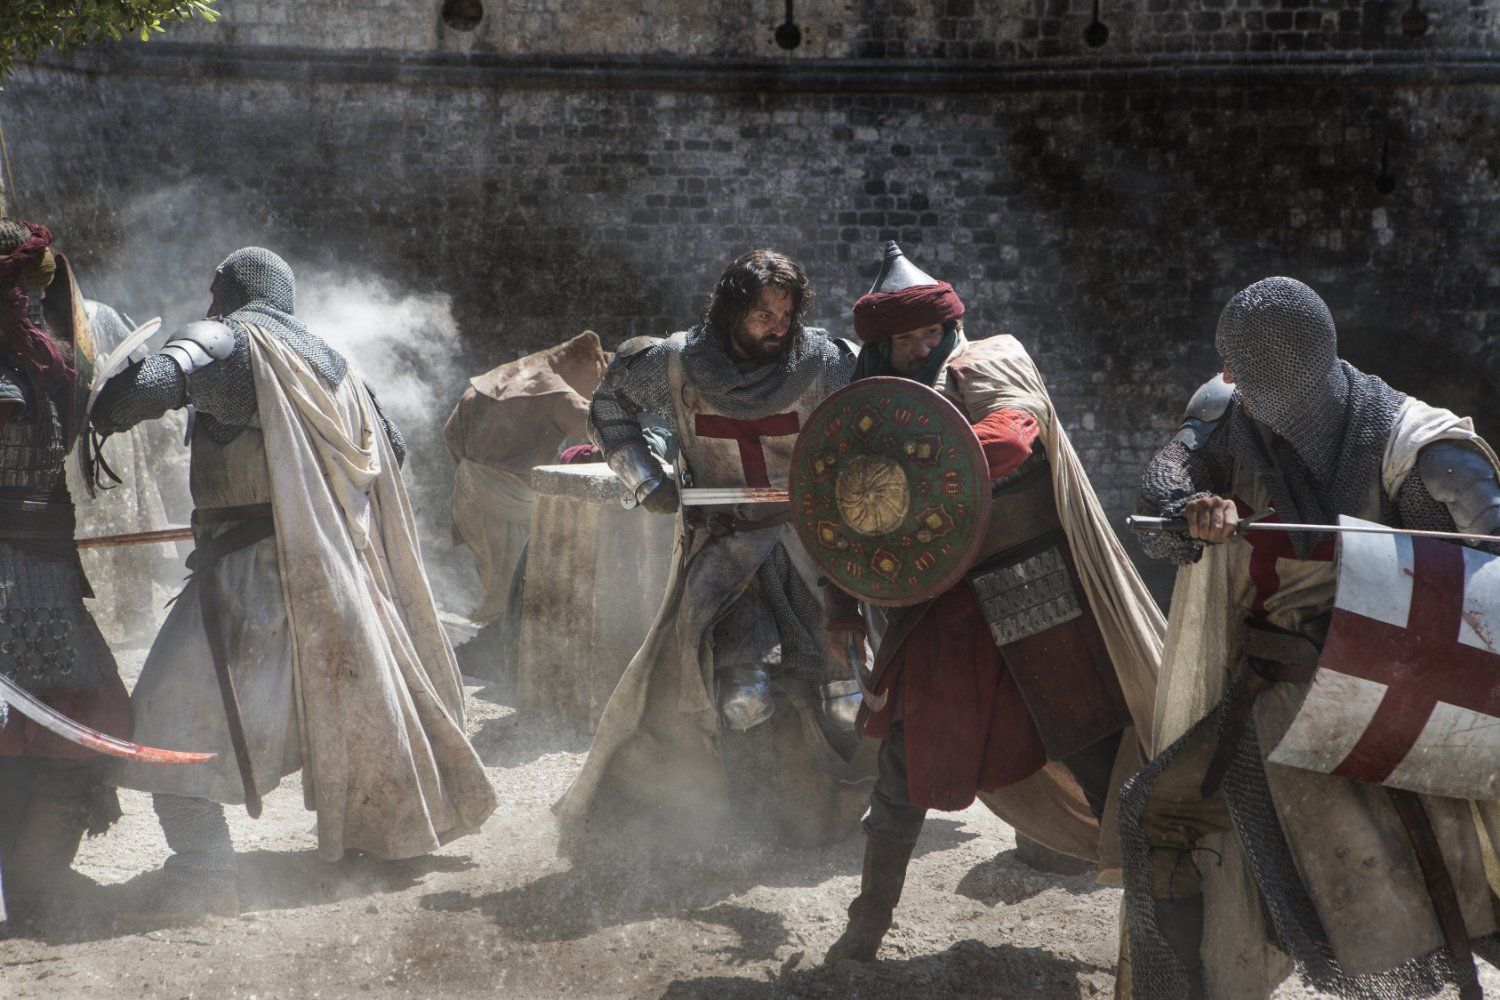 Tom Cullen and others fighting in Knightfall